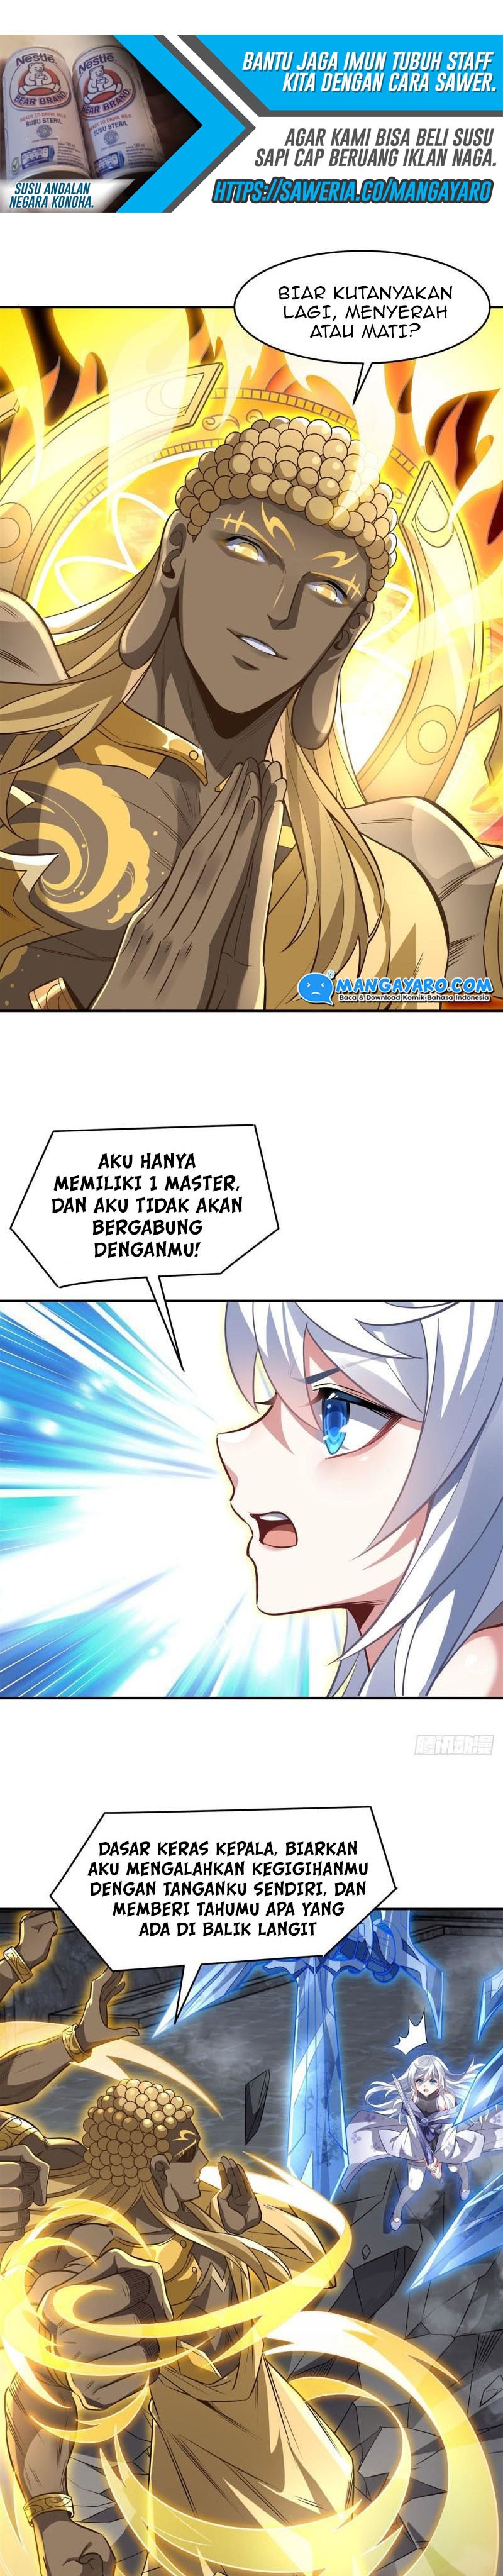 Dilarang COPAS - situs resmi www.mangacanblog.com - Komik my female apprentices are all big shots from the future 067 - chapter 67 68 Indonesia my female apprentices are all big shots from the future 067 - chapter 67 Terbaru 13|Baca Manga Komik Indonesia|Mangacan